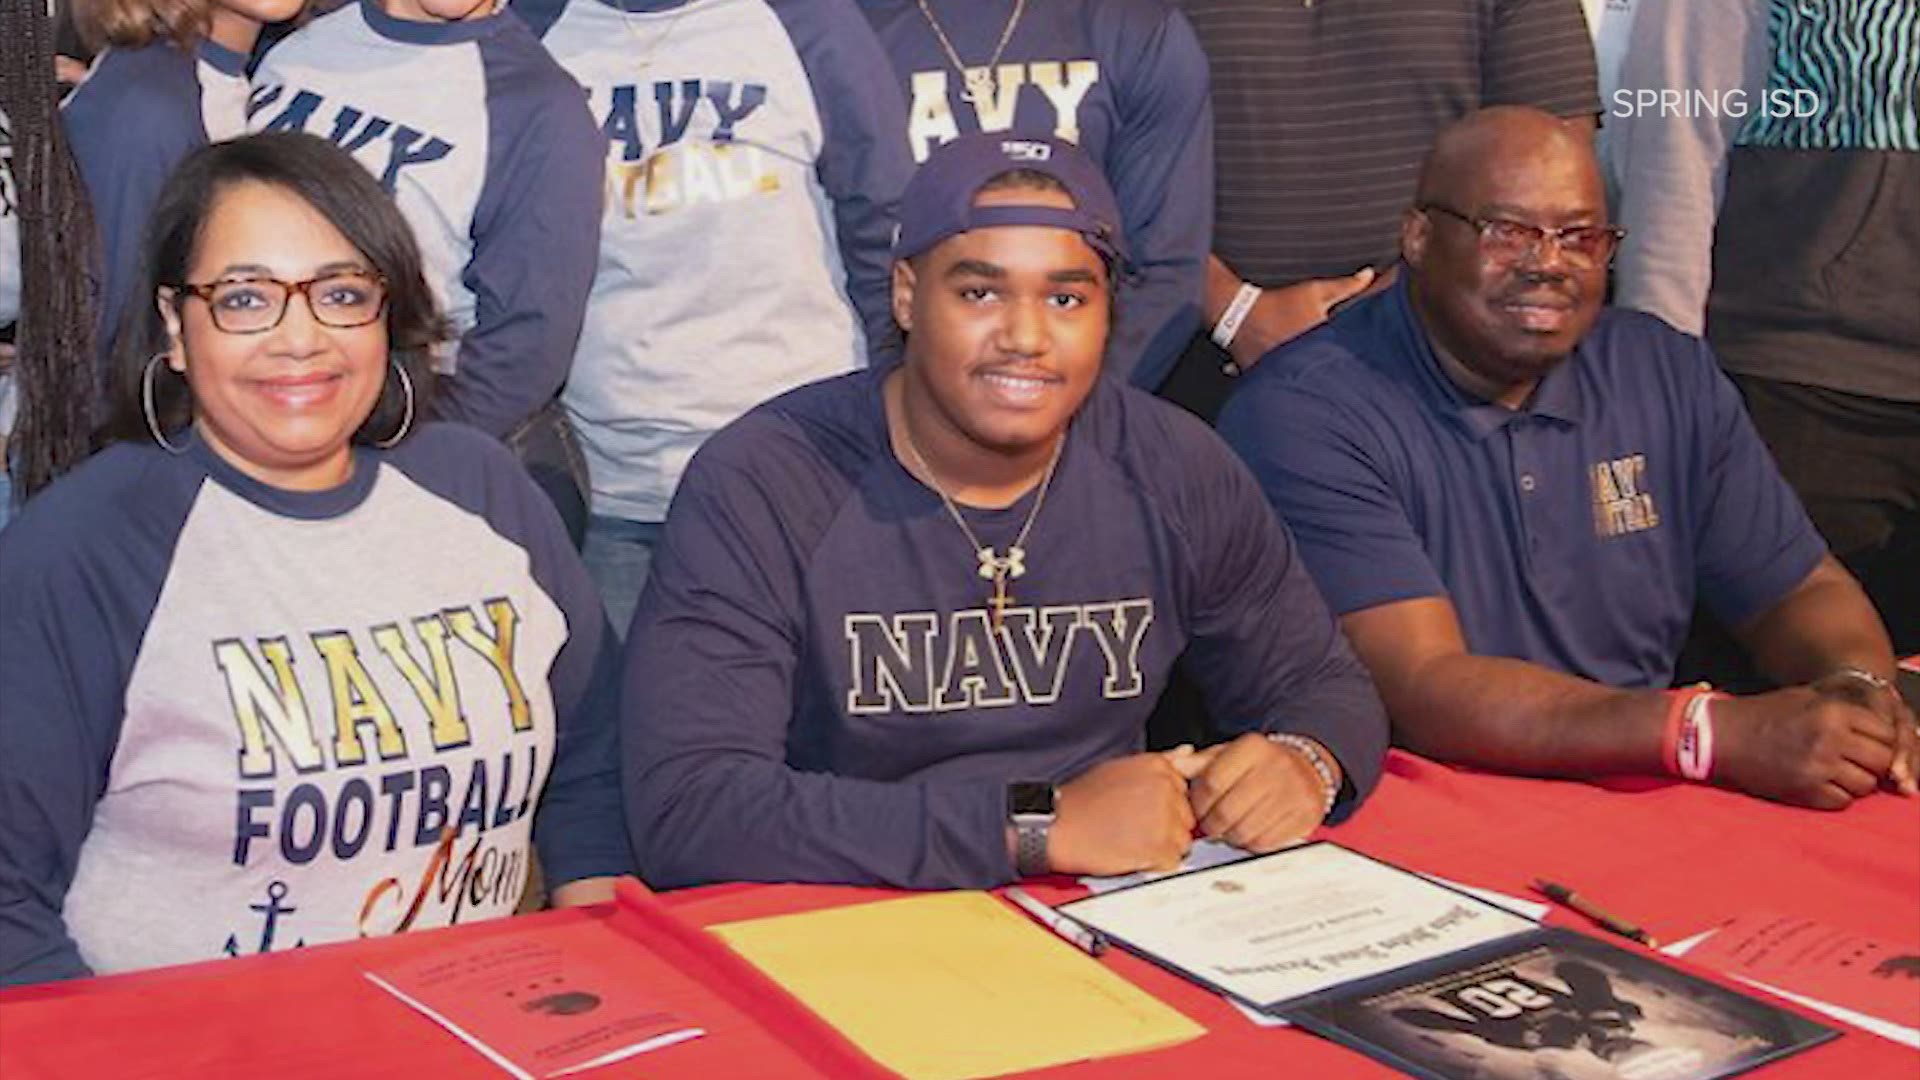 A Houston mother who was thrilled to see her son accepted into the prestigious U.S. Naval Academy was killed in a drive-by shooting in Annapolis, Maryland.